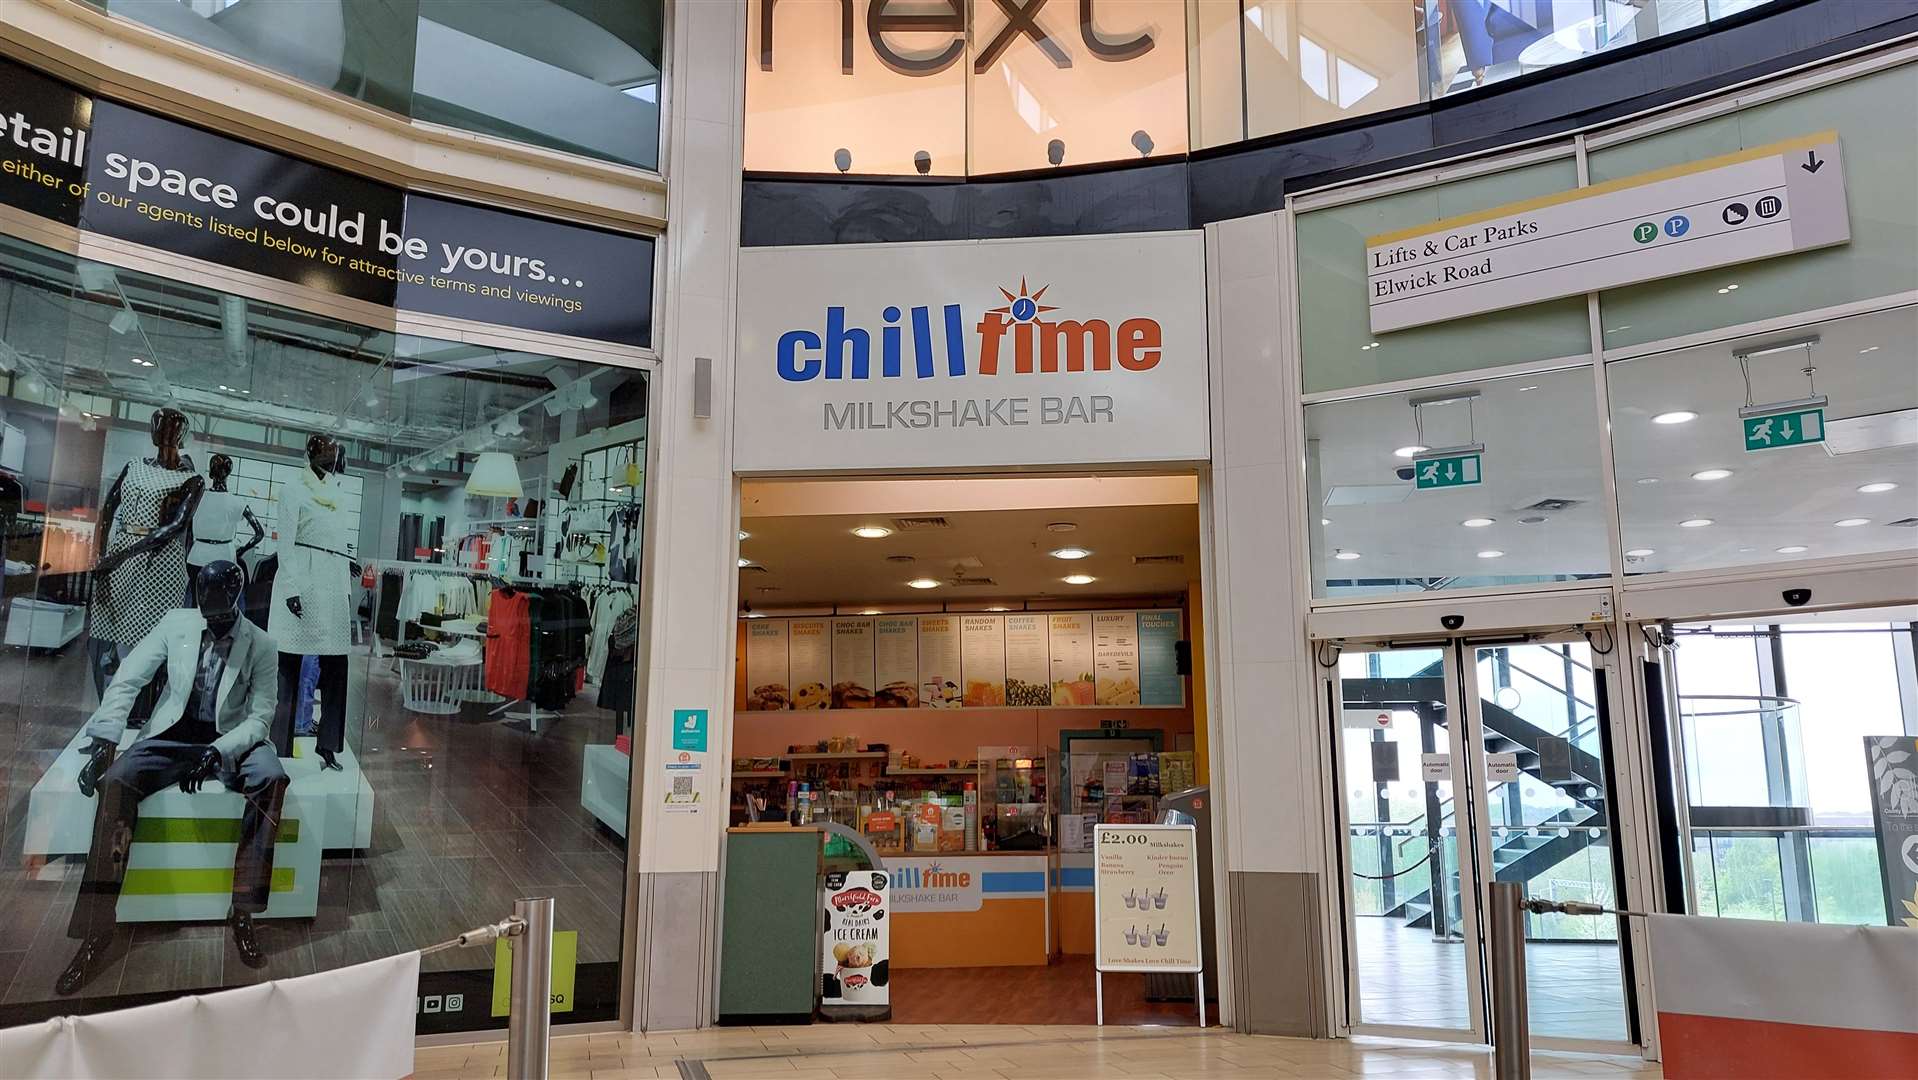 Chill Time Milkshake Bar is one of the last remaining businesses in the County Square extension